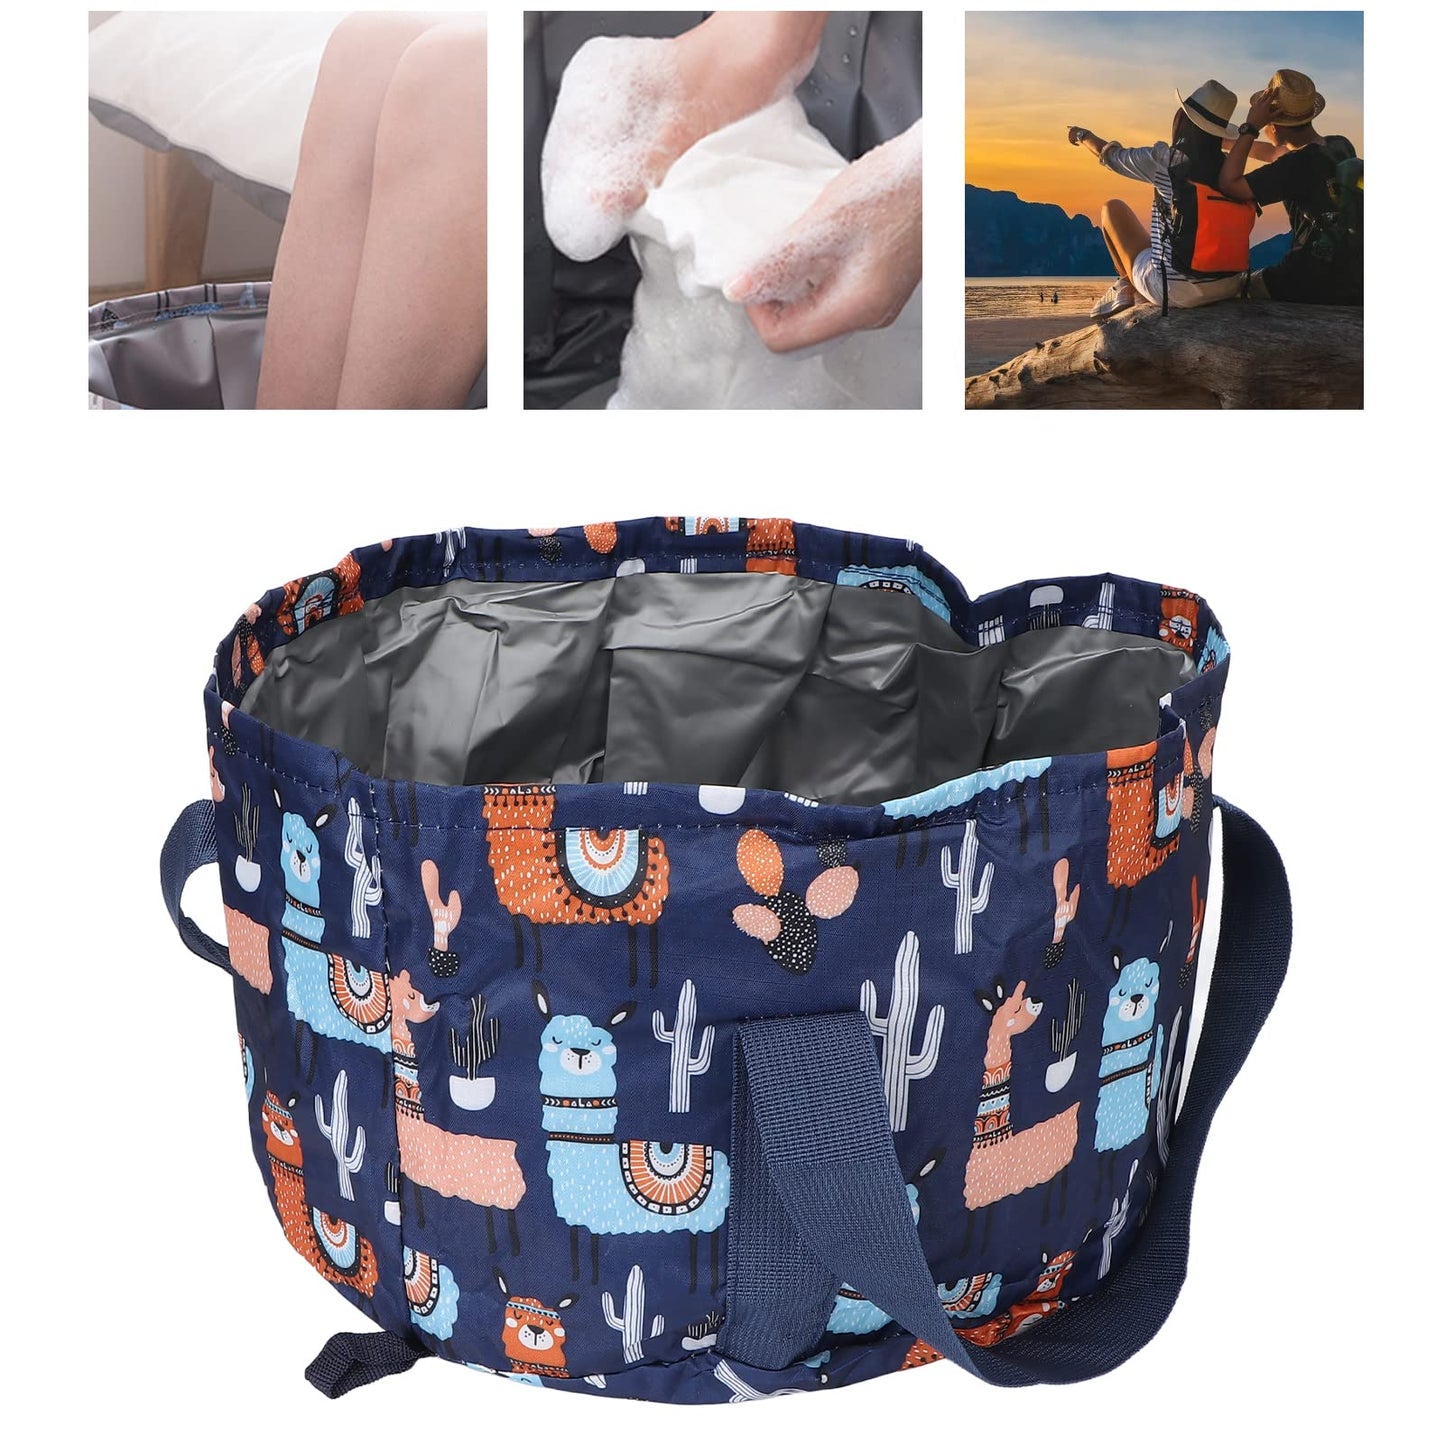 Collapsible Foot Basin 21L Portable Travel Foot Bath Tub Bag with Handles Folding Foot Bath Basin for Soaking Feet Pedicure Foot Spa Bucket Outdoor Camping Water Container(Navy)